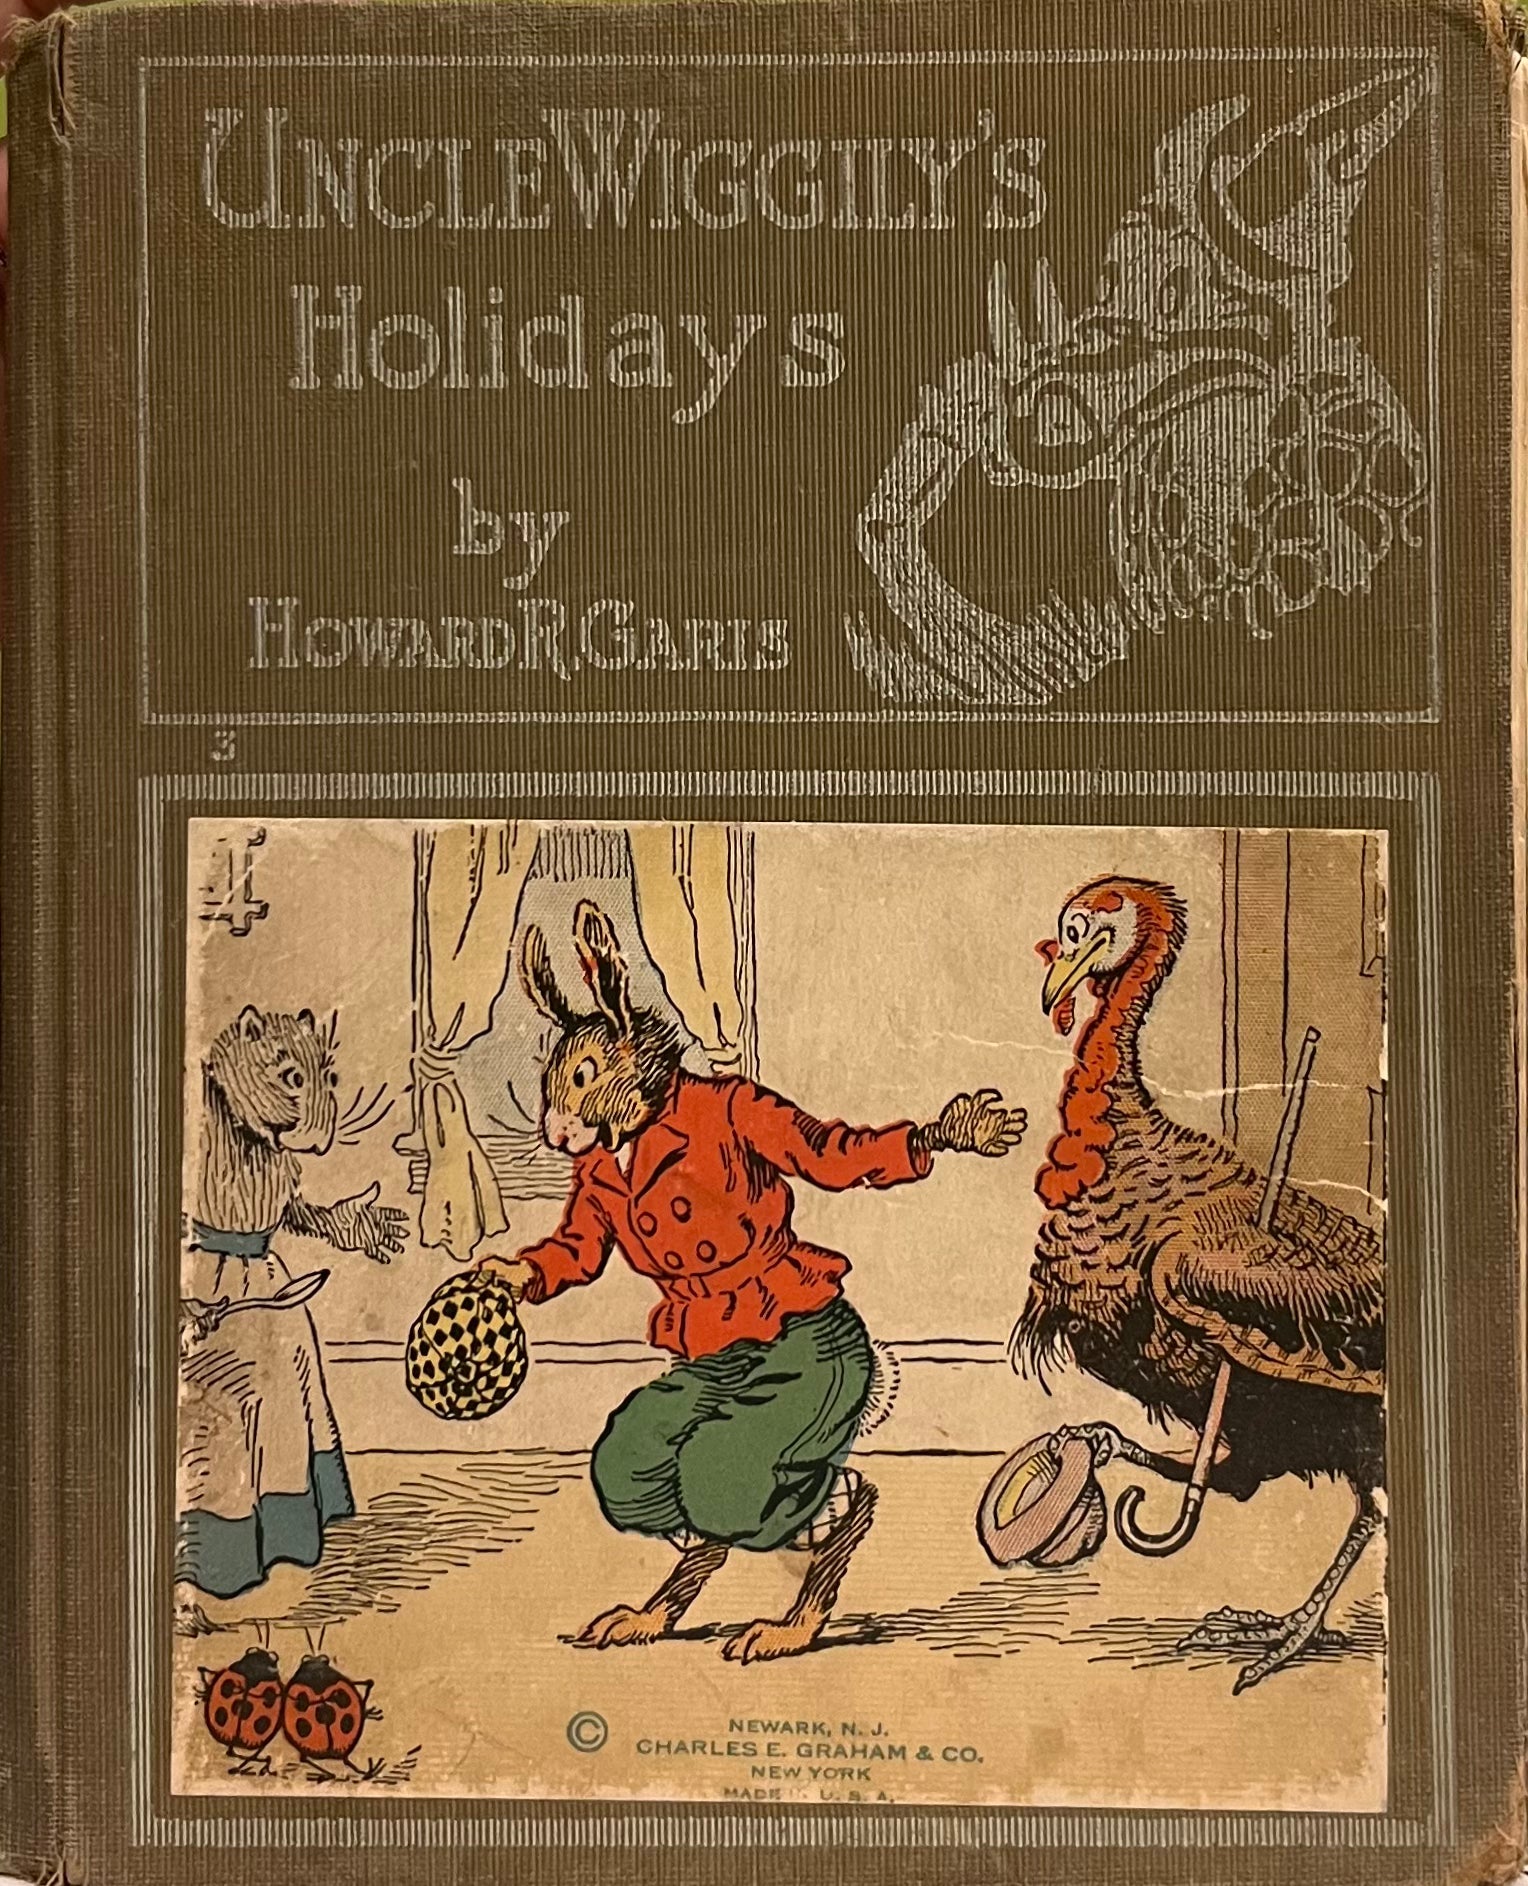 Uncle Wiggily’s Holidays by Howard R. Garis